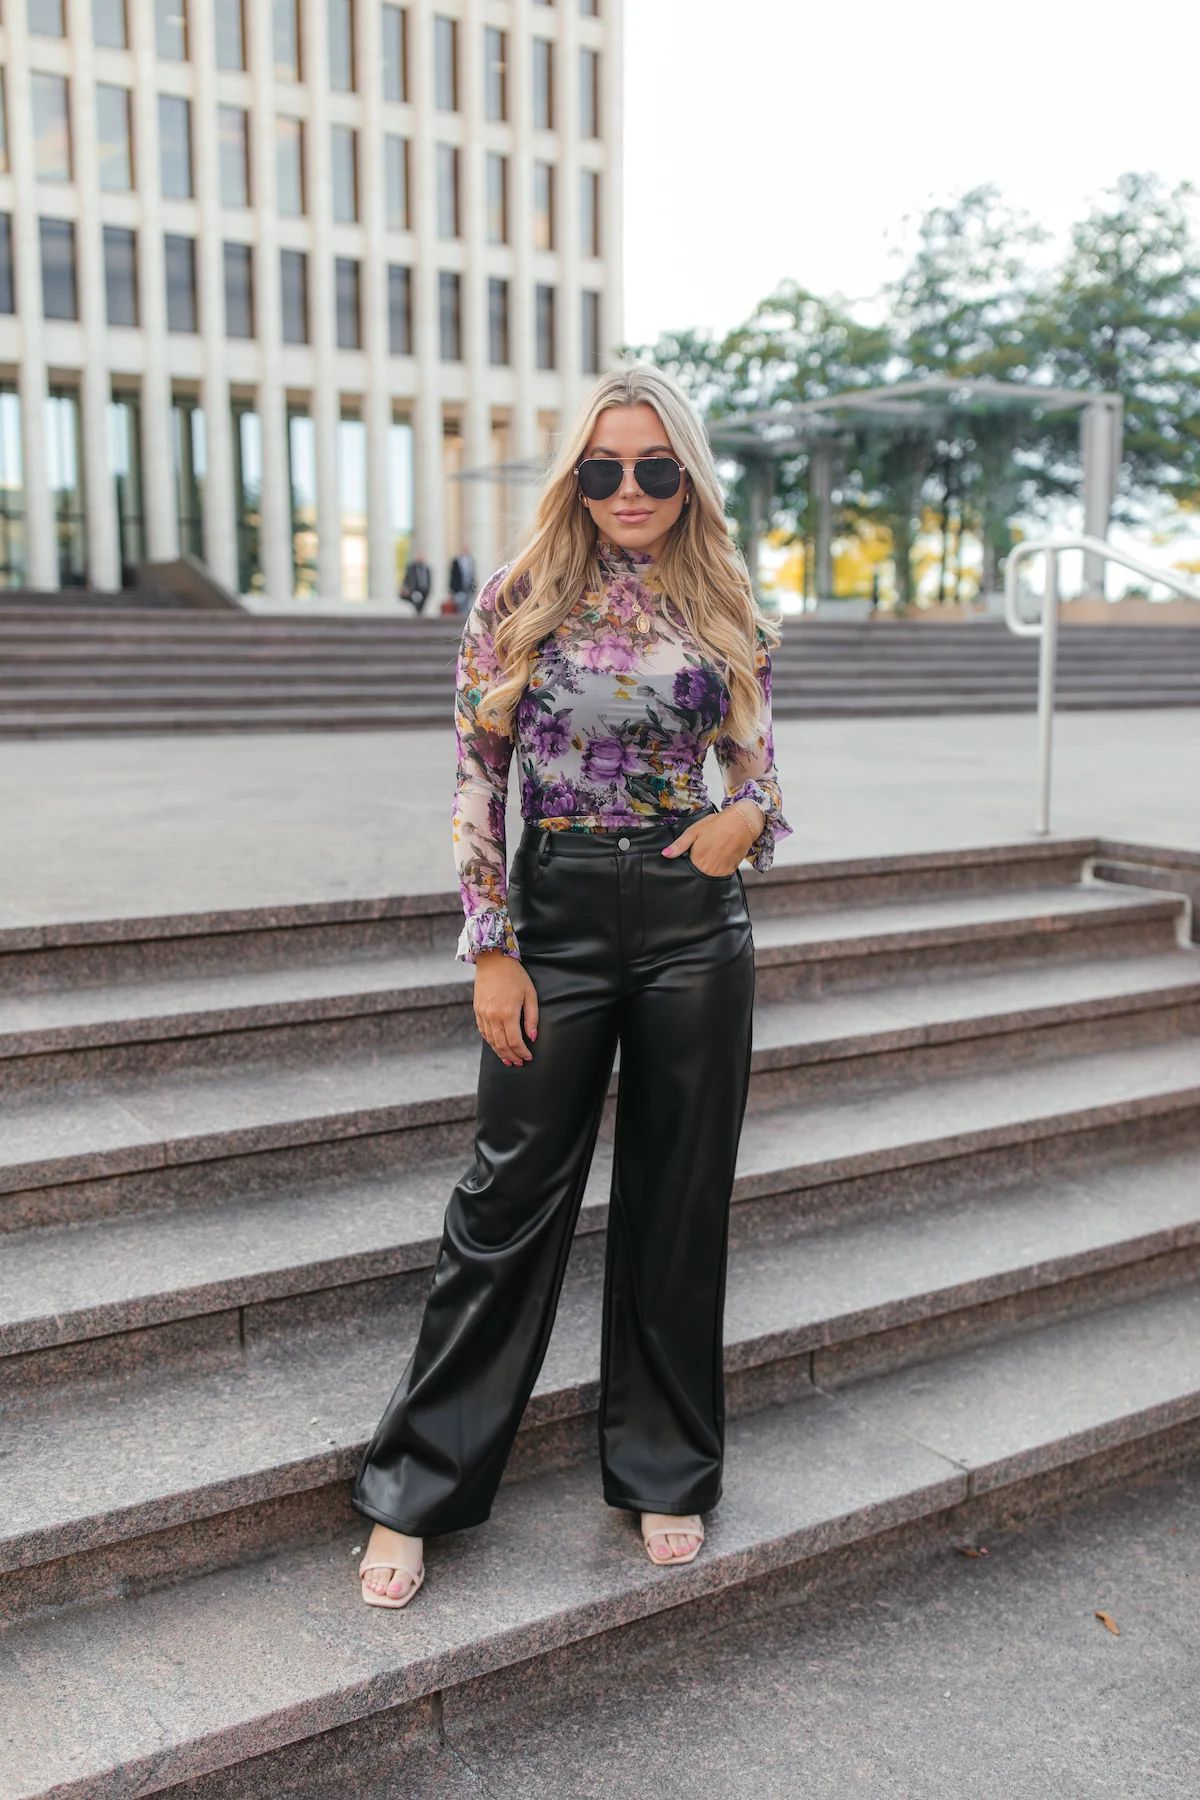 Chloe Floral Top | The Post